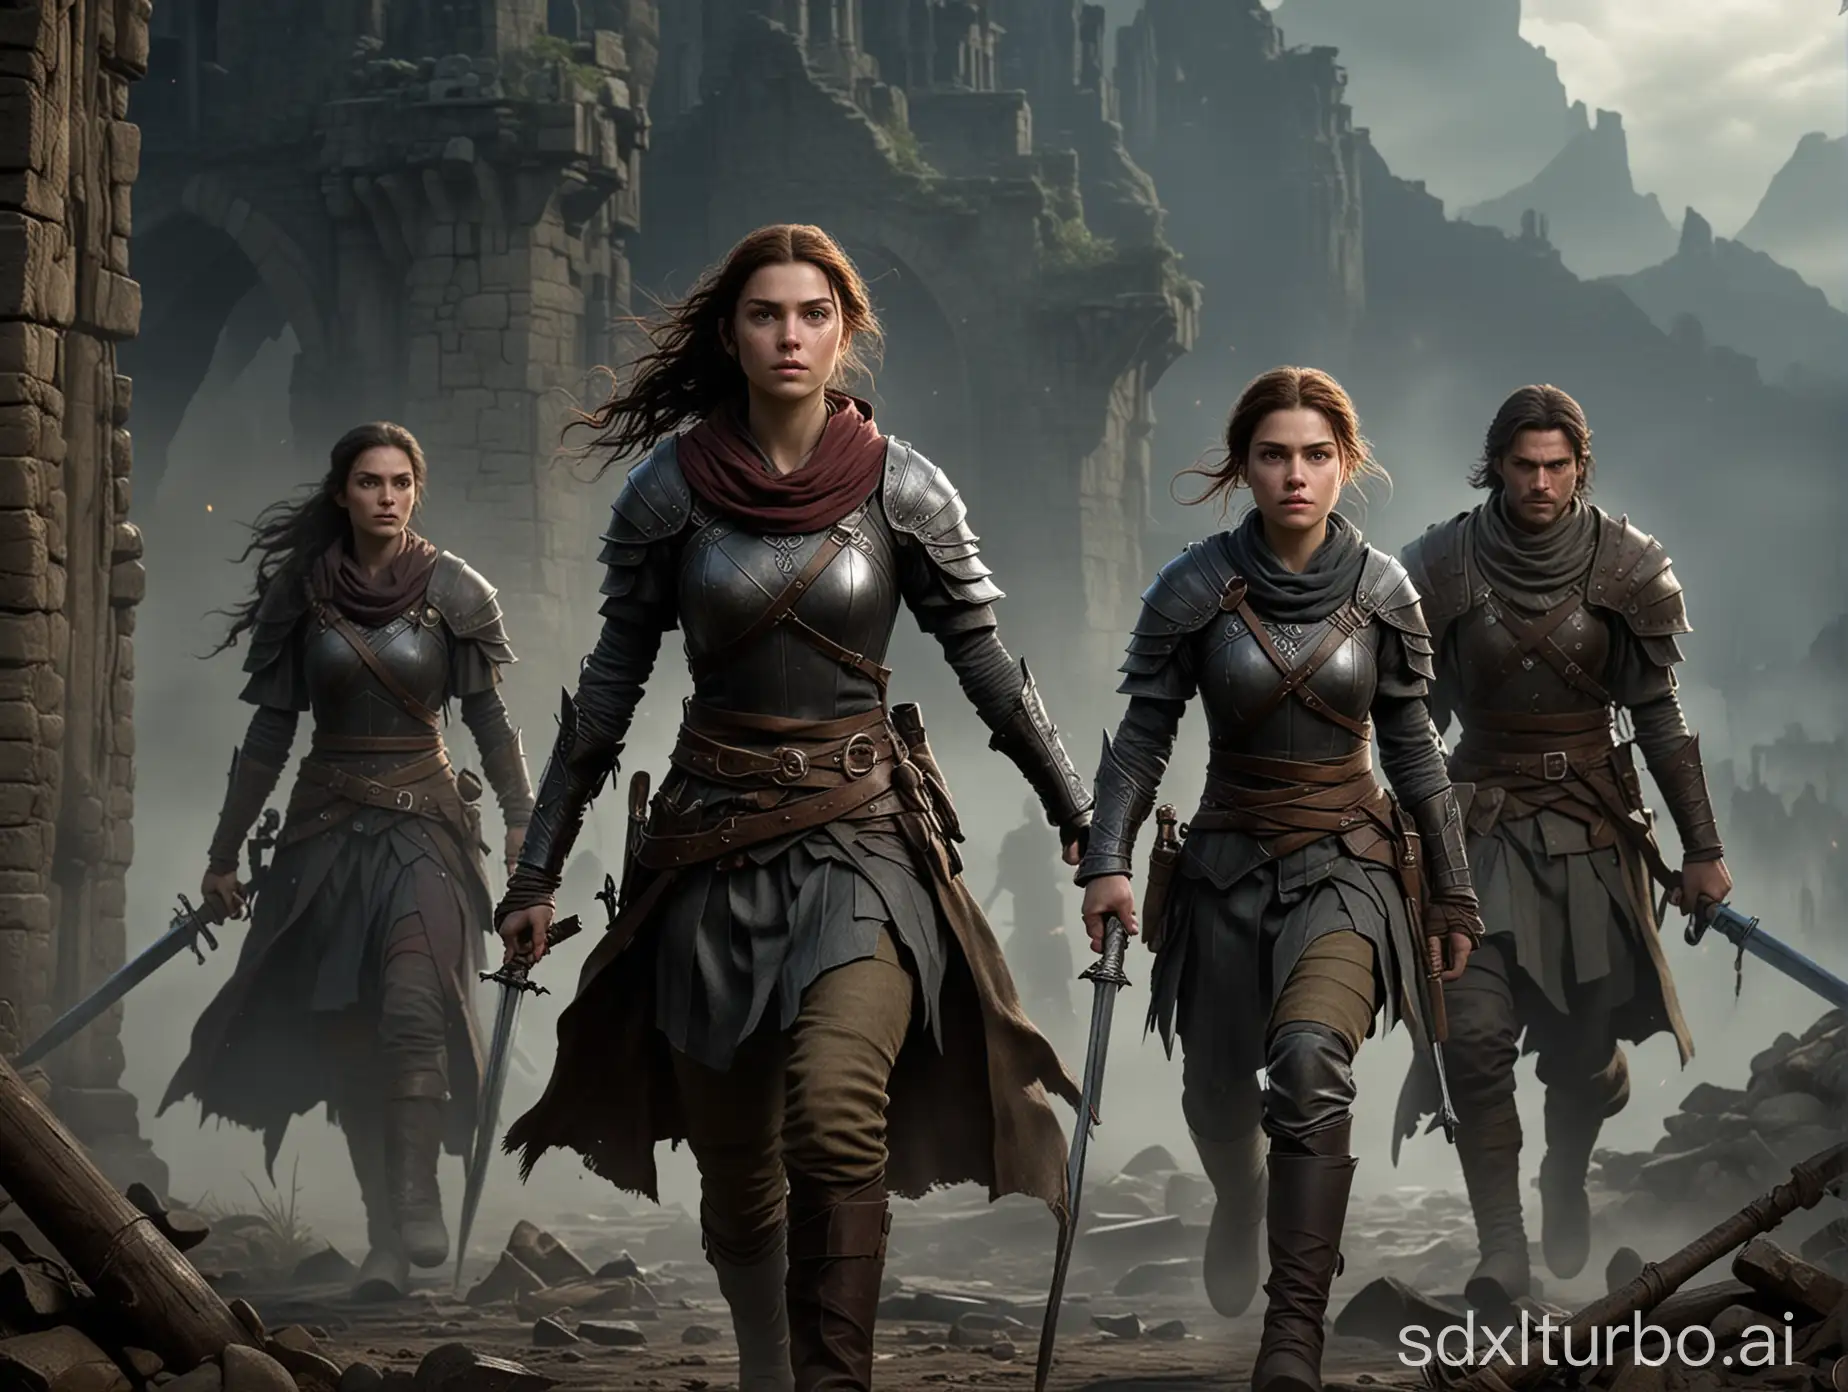 Young-Sorceress-Arya-and-Companions-Confront-Dark-Forces-in-Forgotten-Ruins